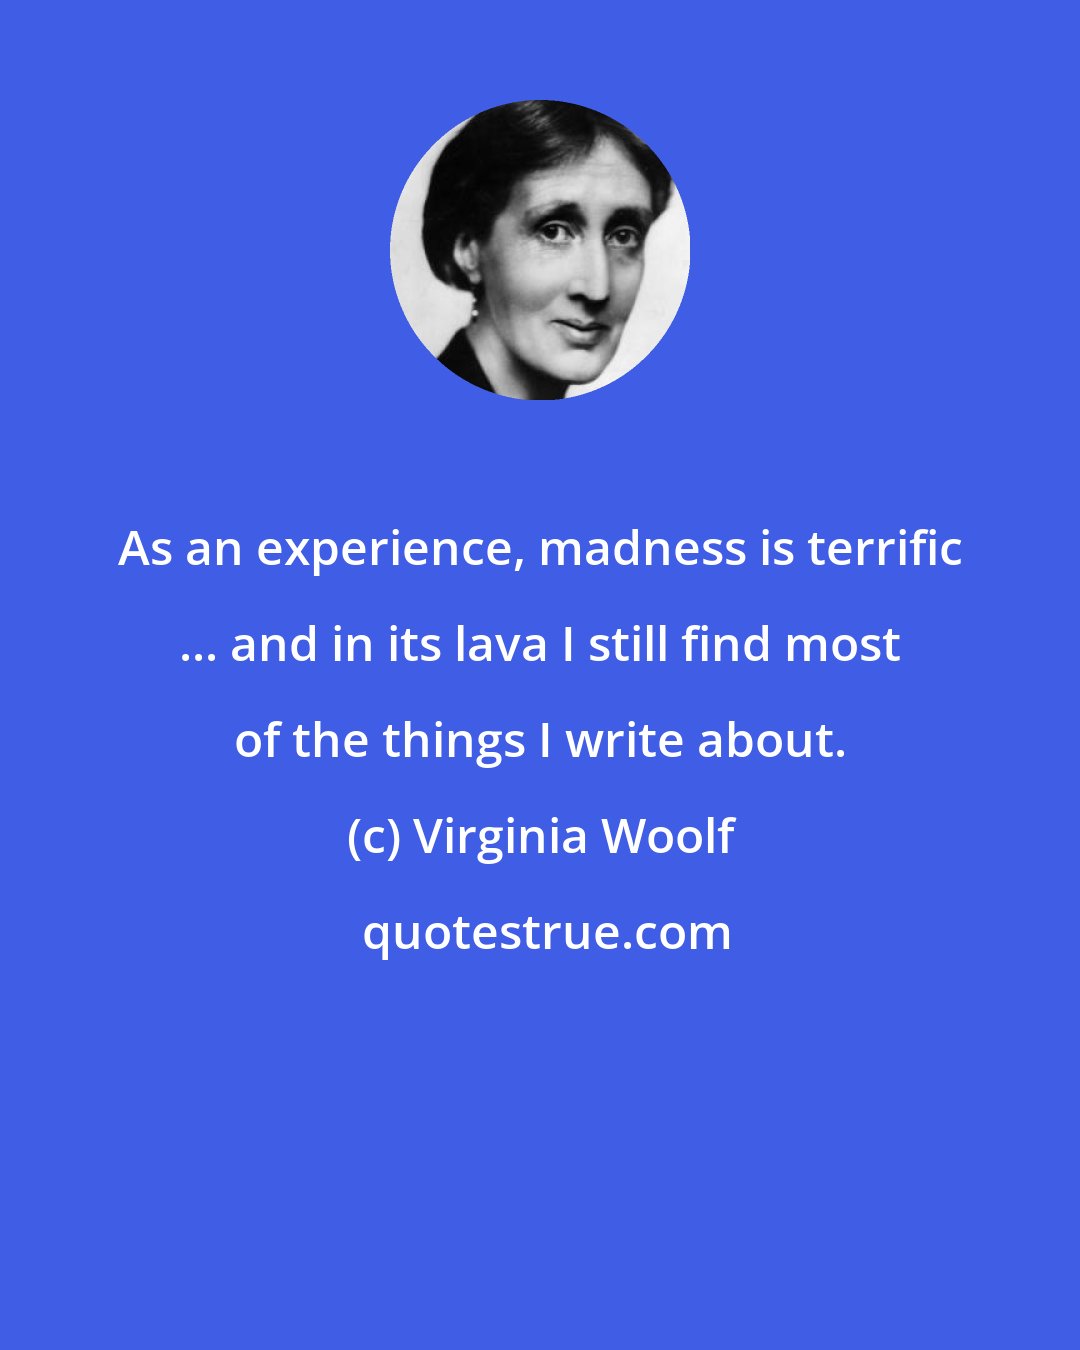 Virginia Woolf: As an experience, madness is terrific ... and in its lava I still find most of the things I write about.